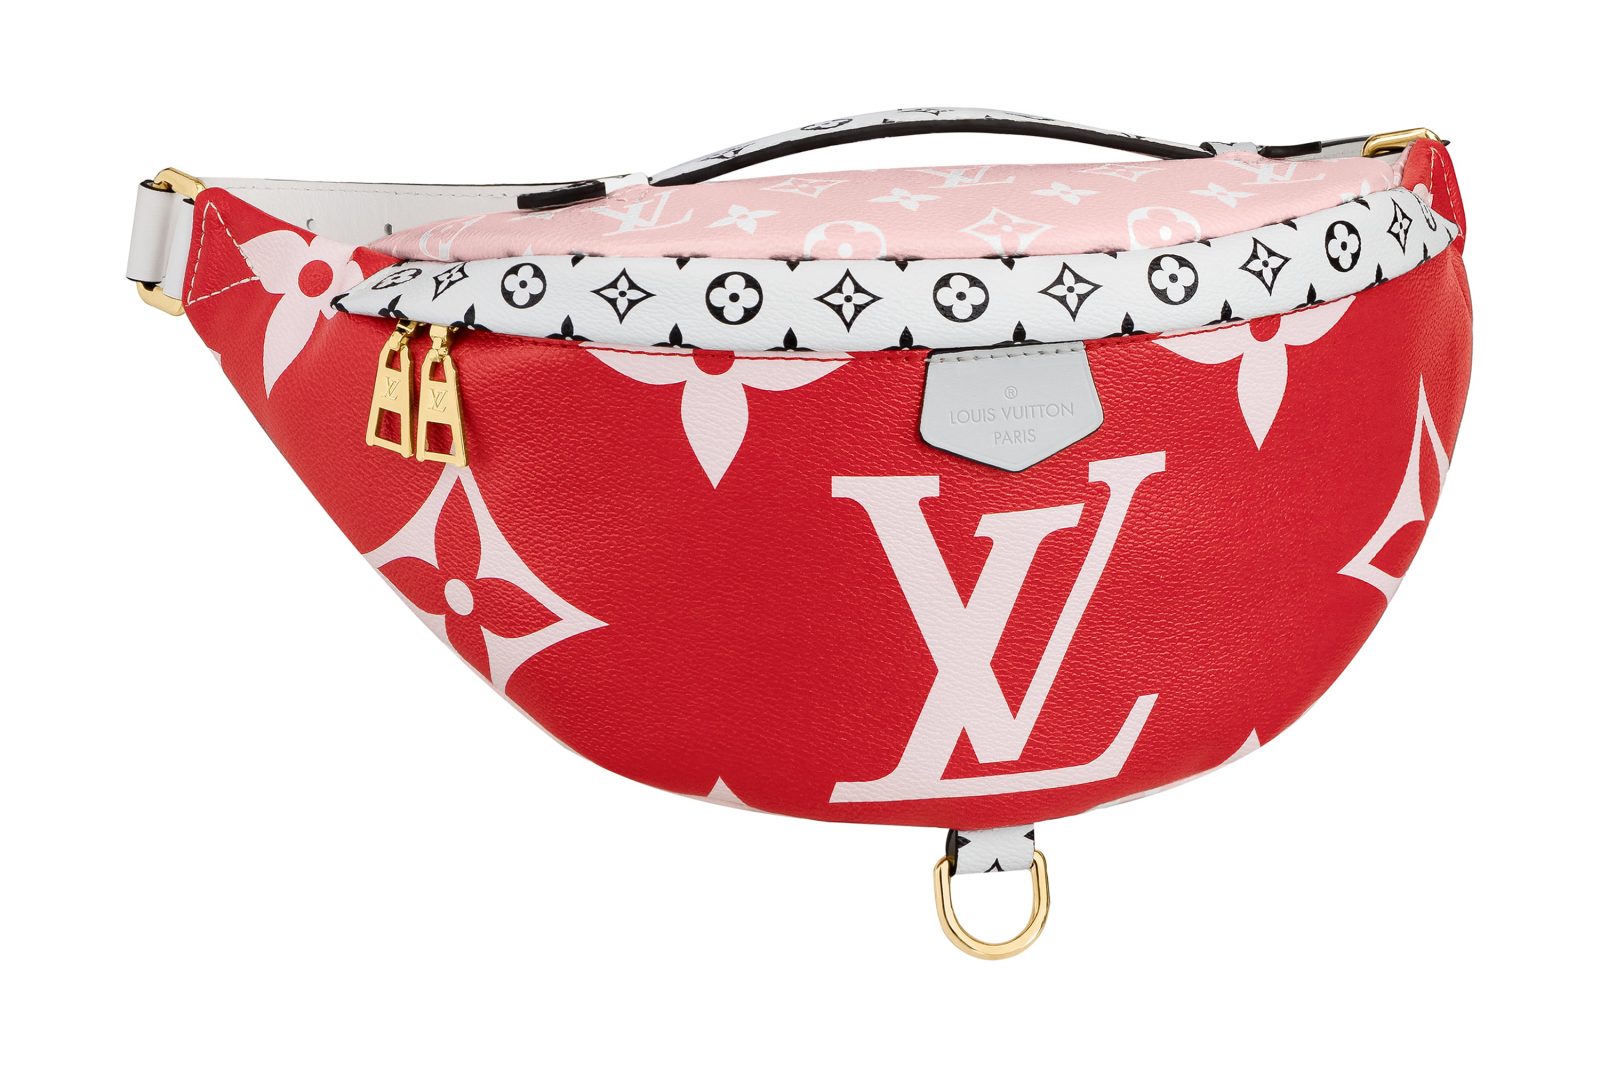 Louis Vuitton x 24 Sèvres: A chic and modern capsule for summer 2018